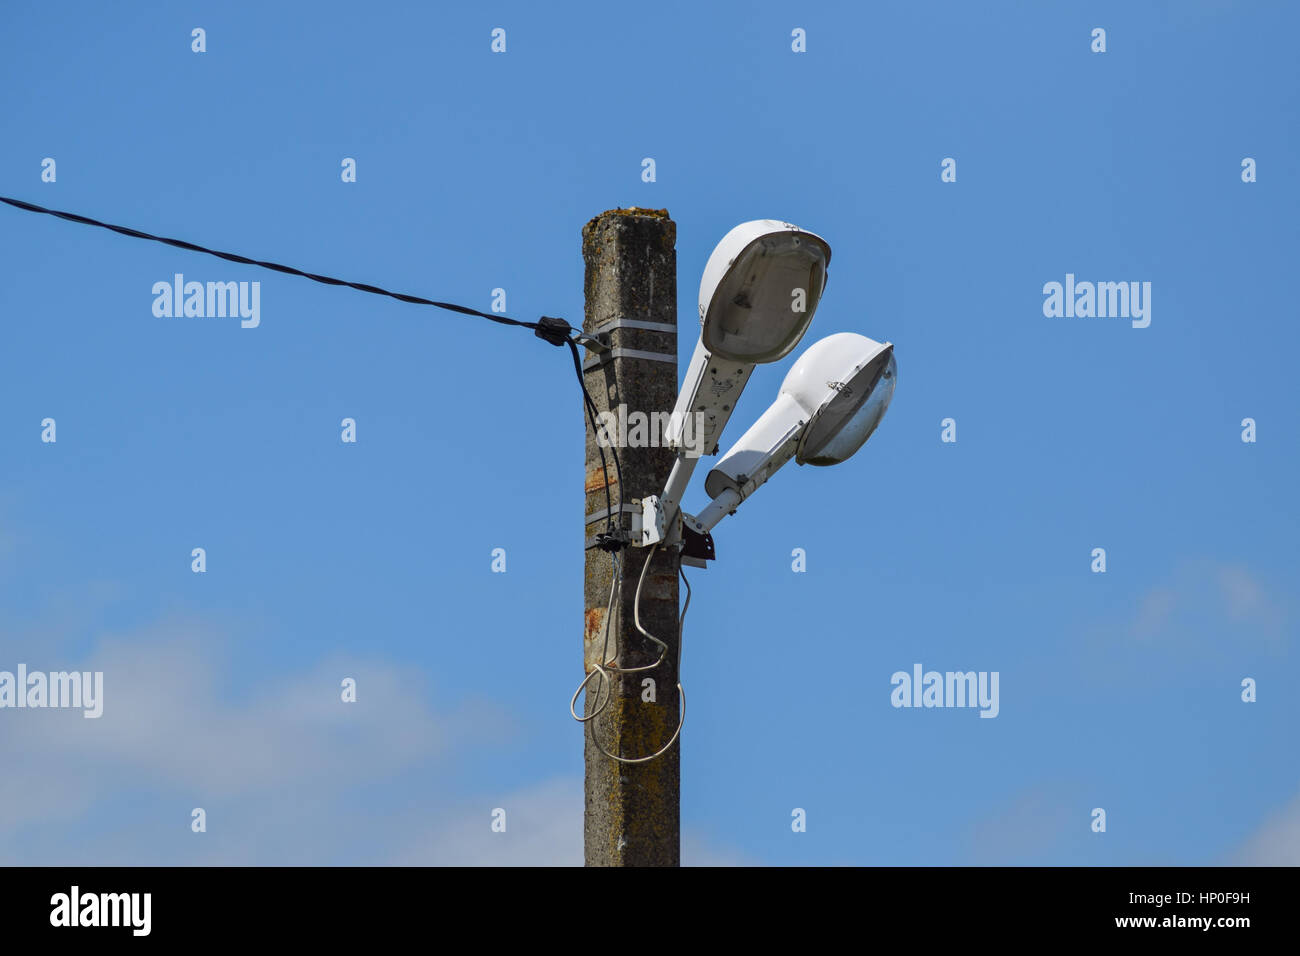 Lanterns on the pole. A pillar of power line with lighting fixtures. Stock Photo